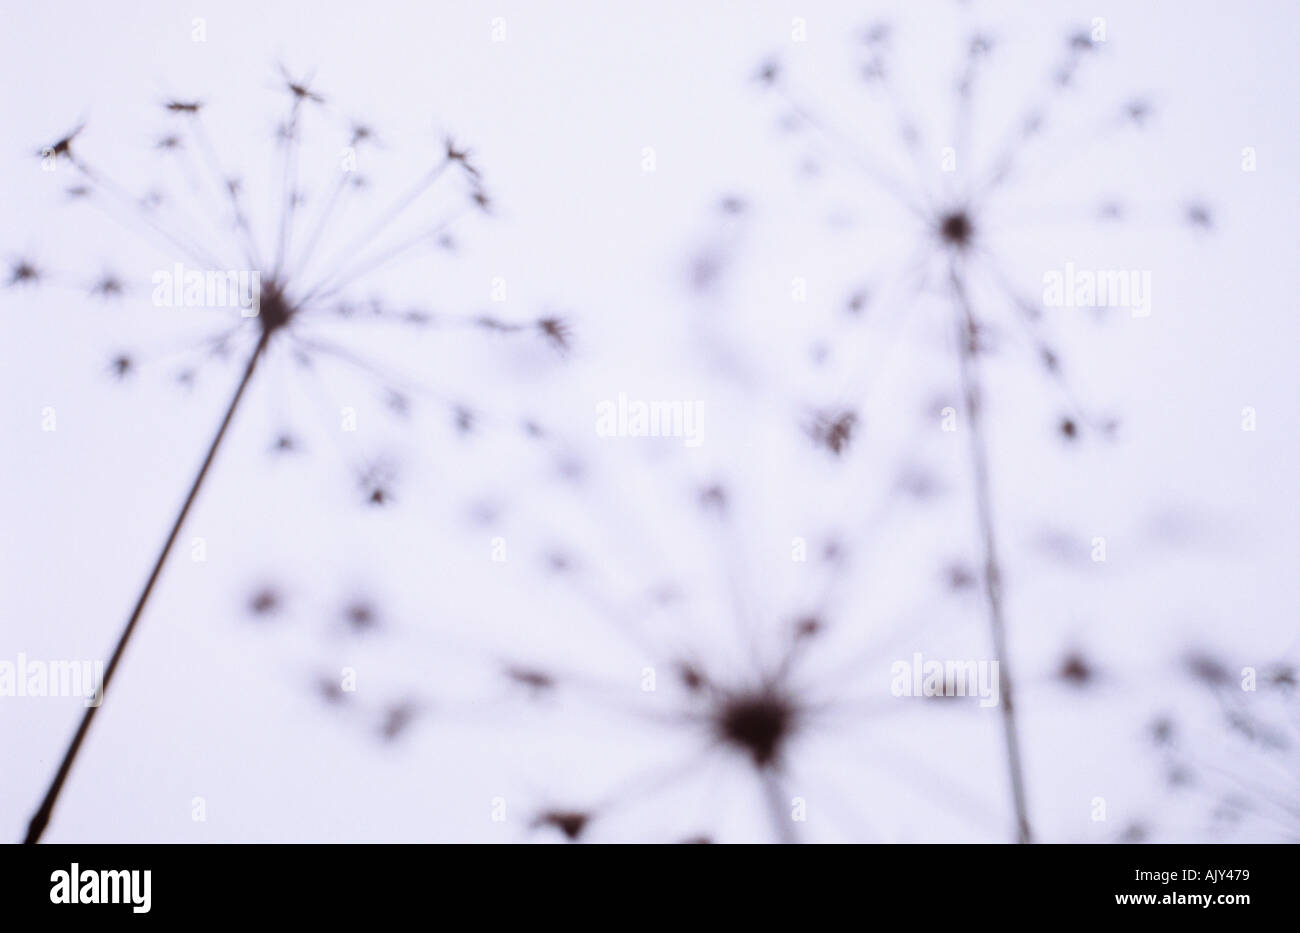 Seed heads of Hogweed or Heracleum sphondylium silhouetted against a winter sky Stock Photo